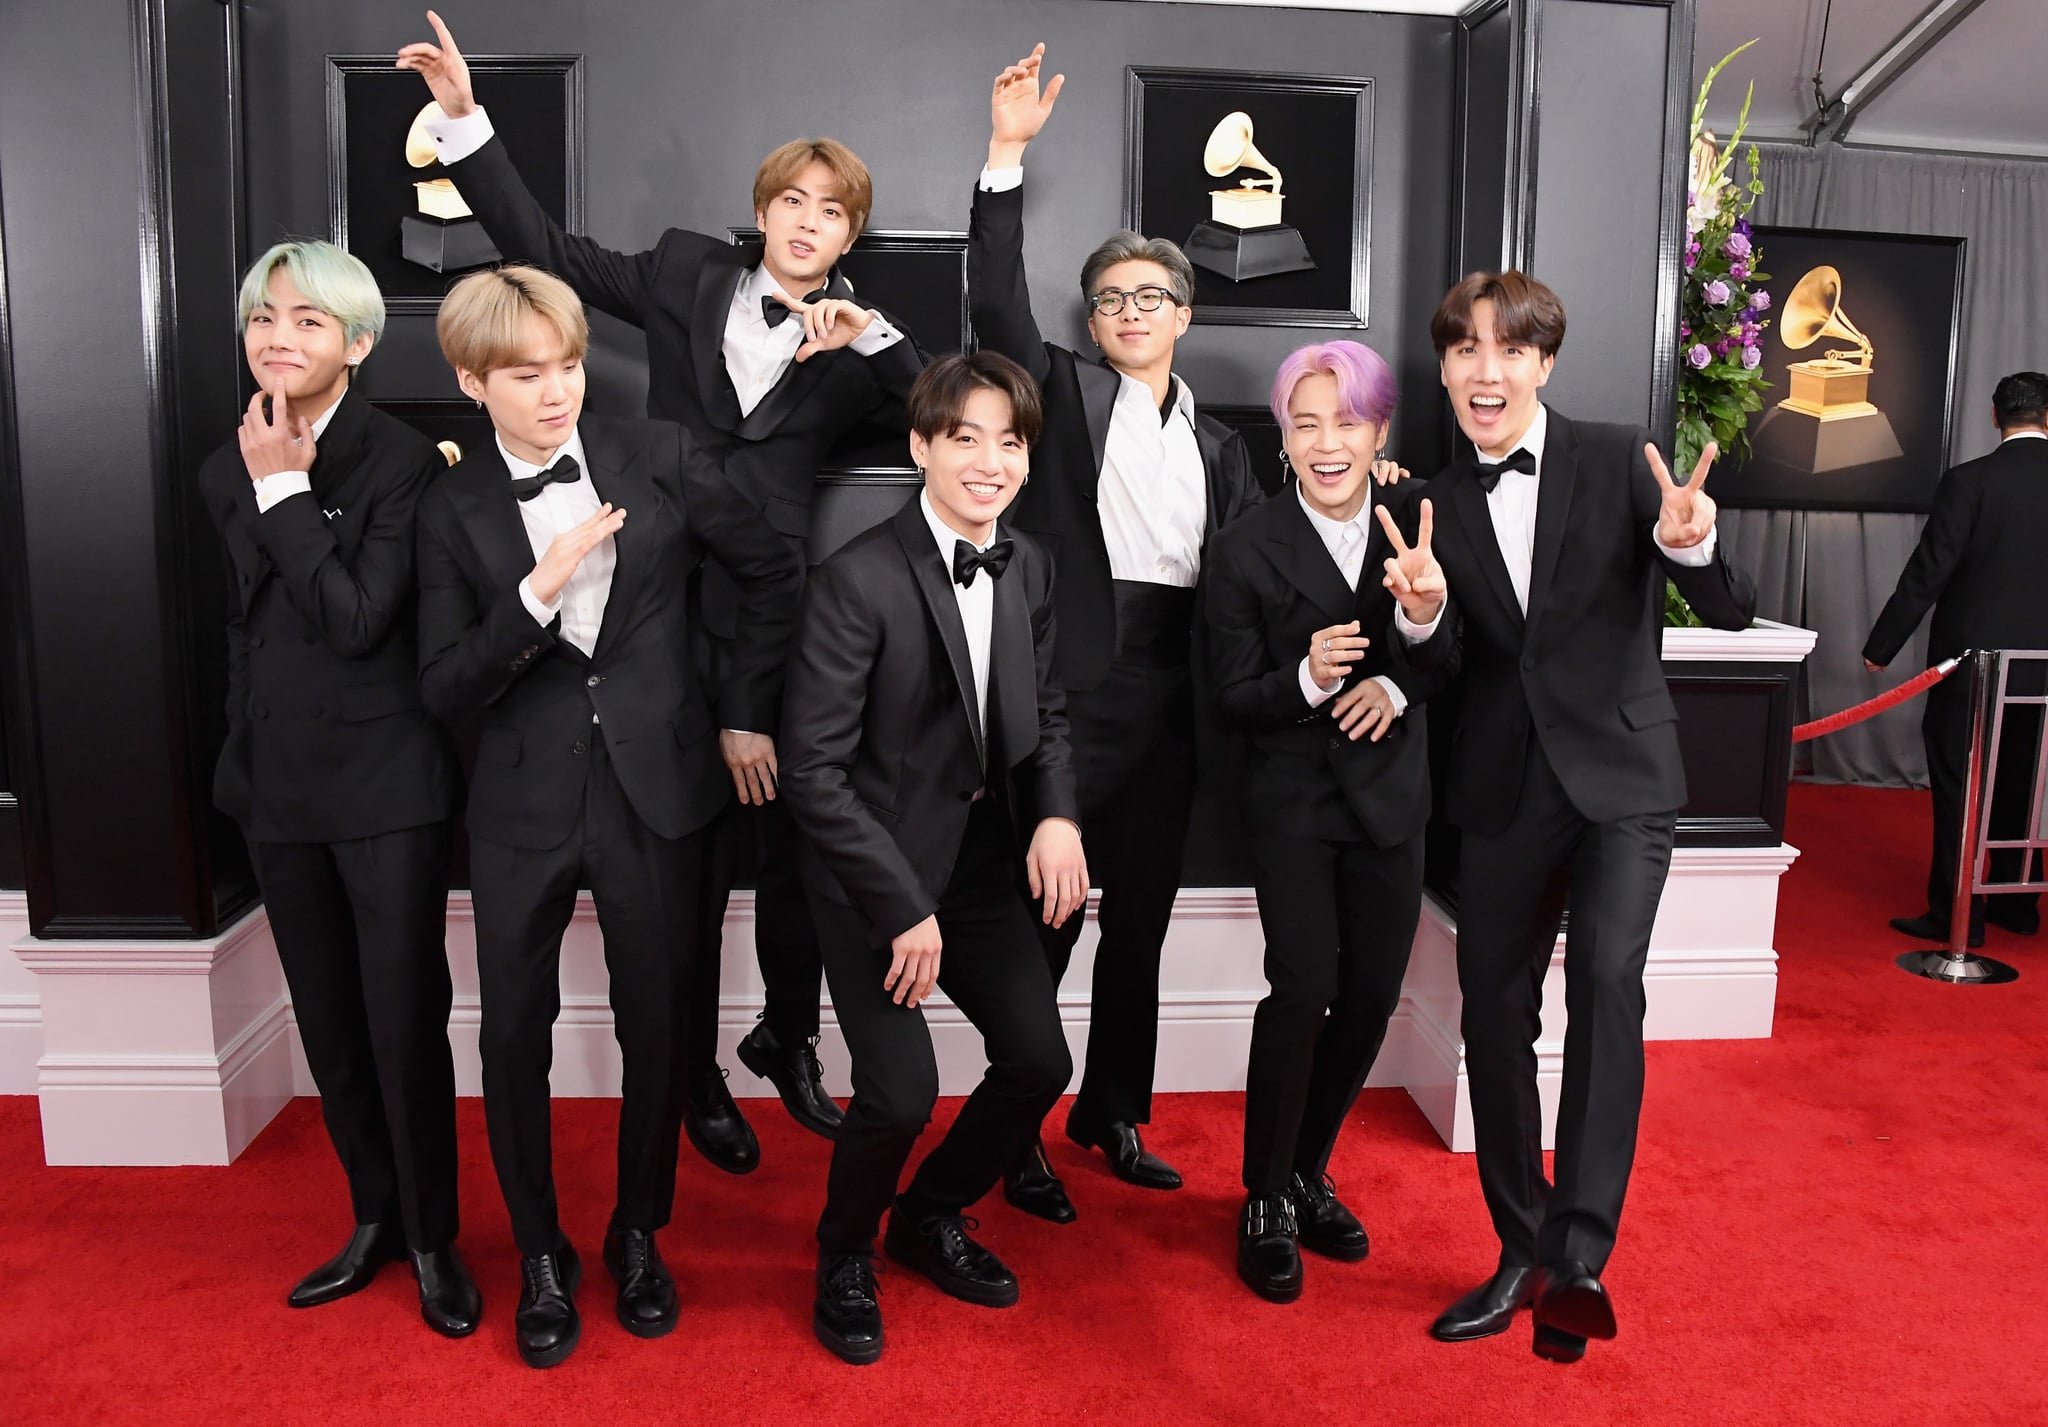 You Can Now Own BTS' Grammys 'Dynamite' Performance Suits